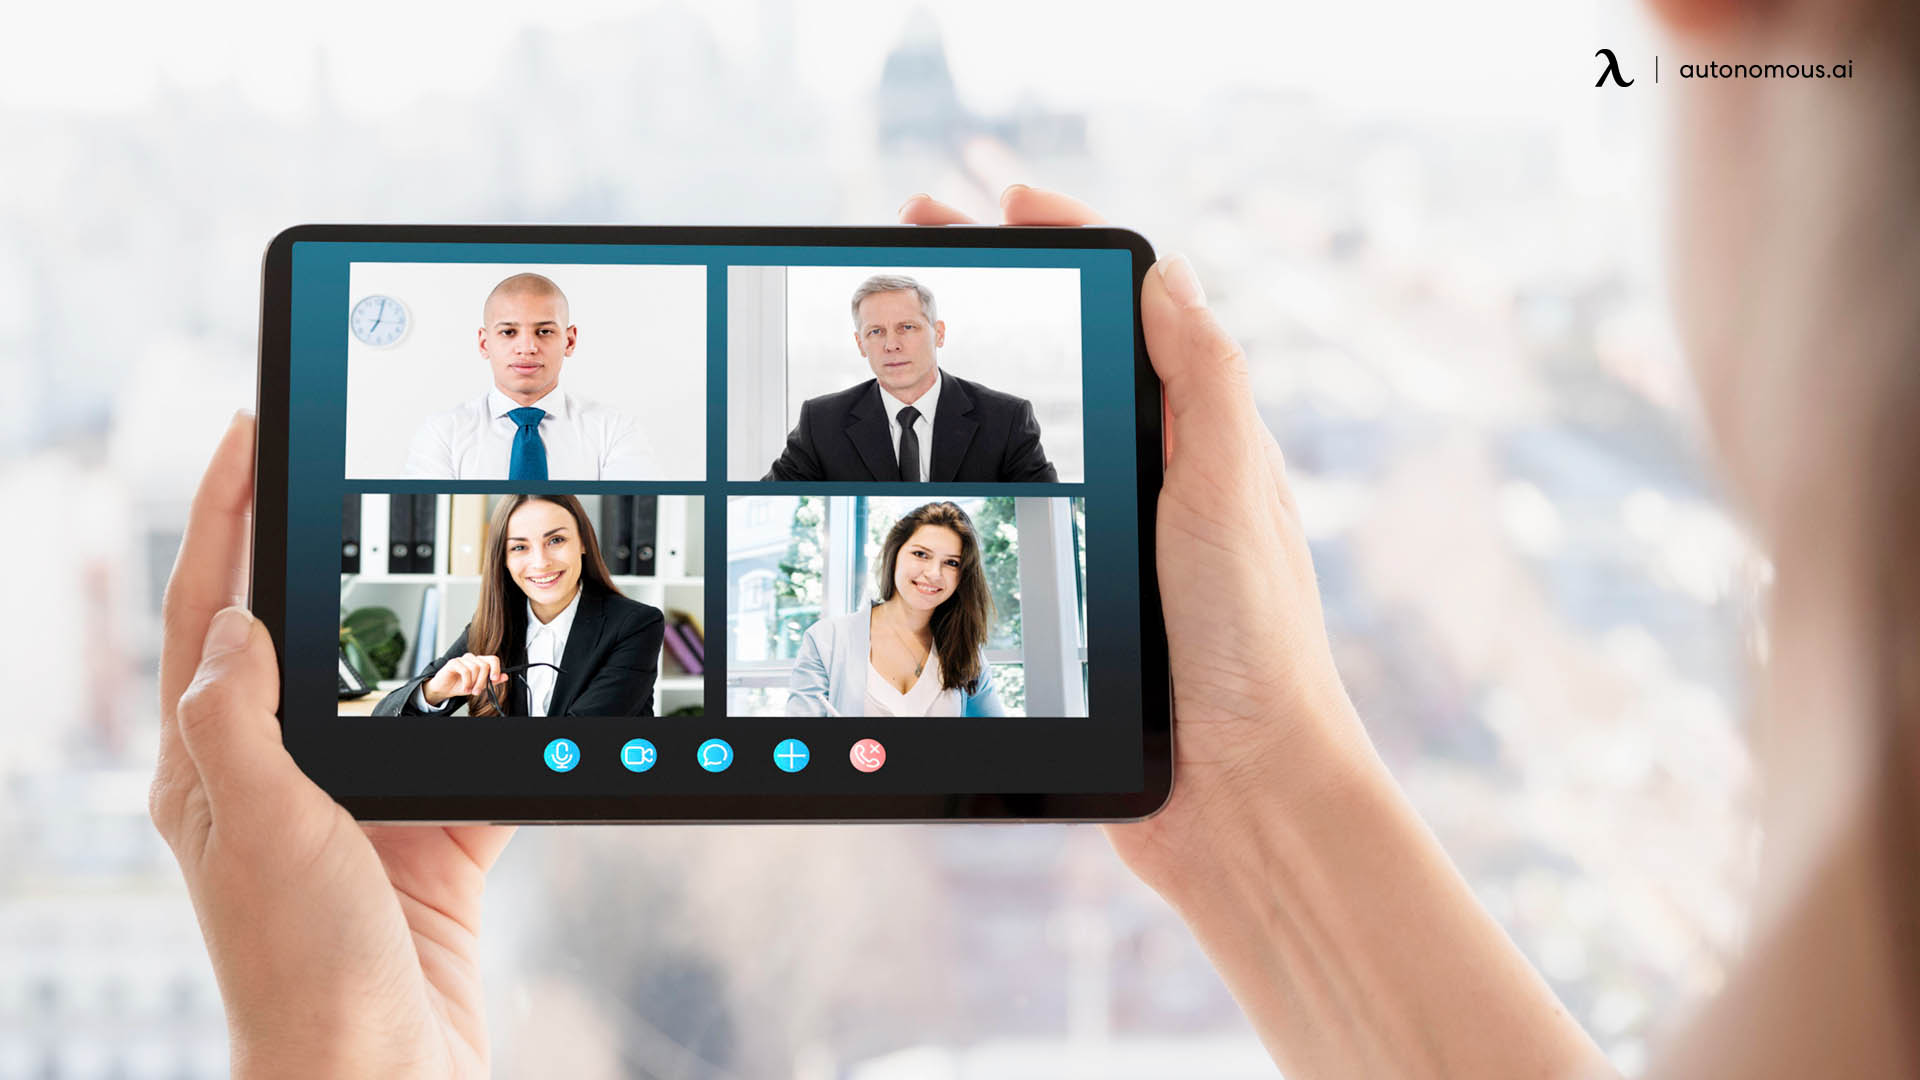 5 Common Virtual Meeting Challenges & How to Overcome Them